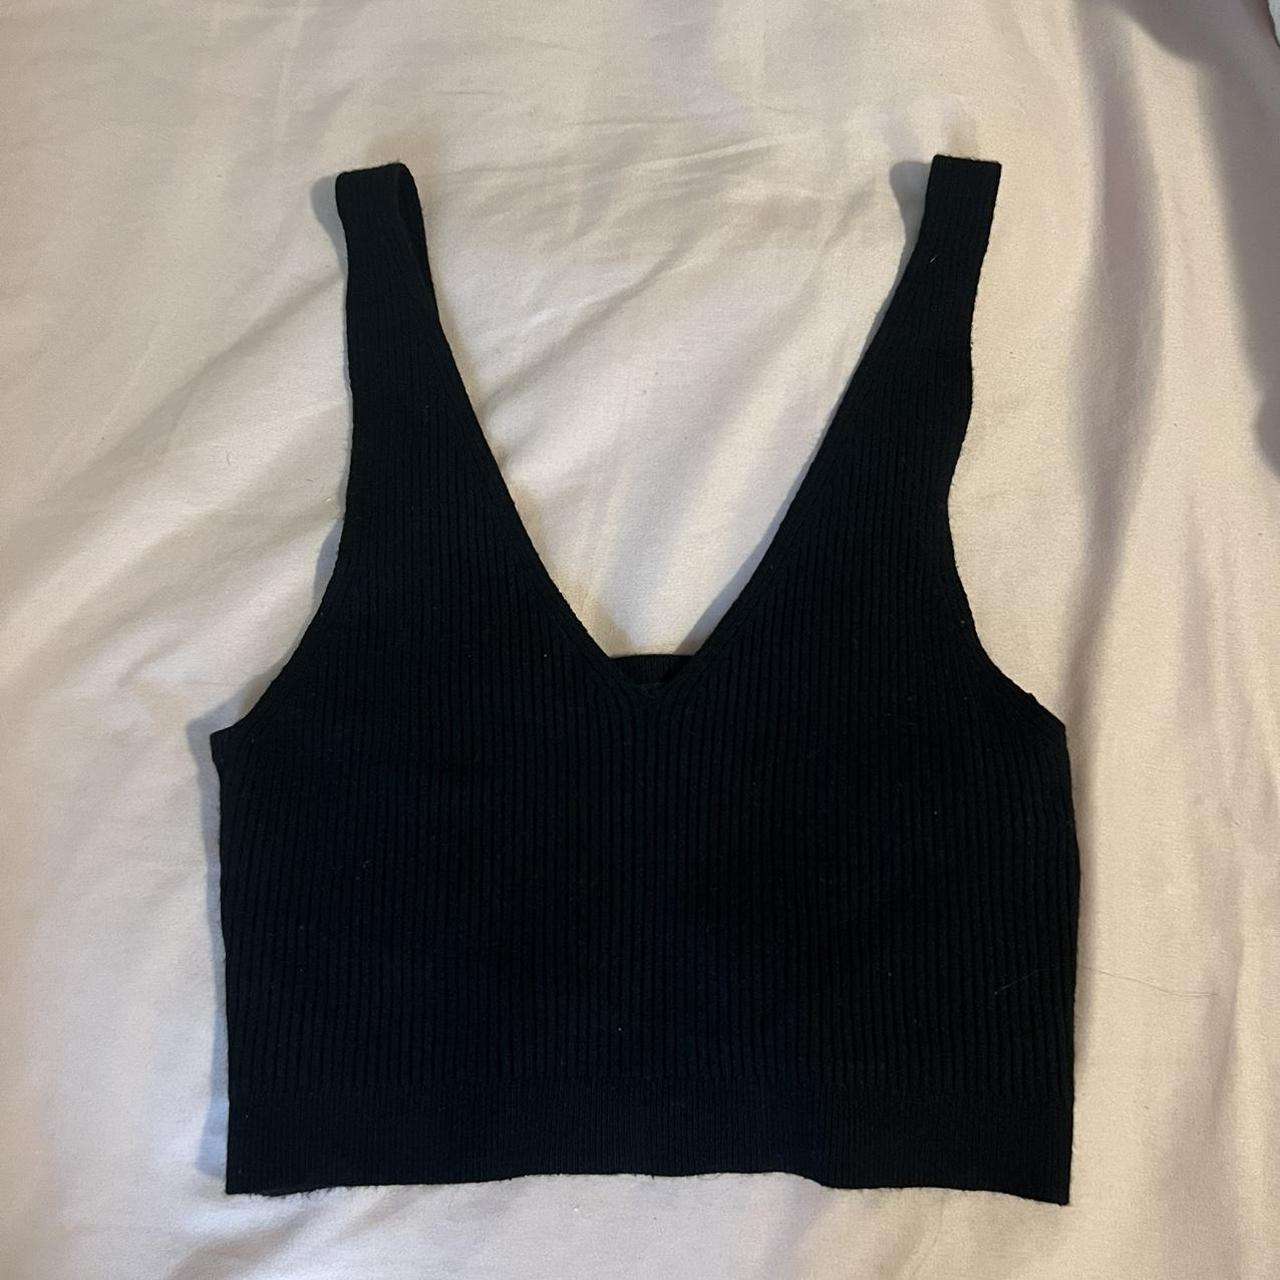 Product Image 1 - Ribbed Black Tank Top 🖤
-cropped